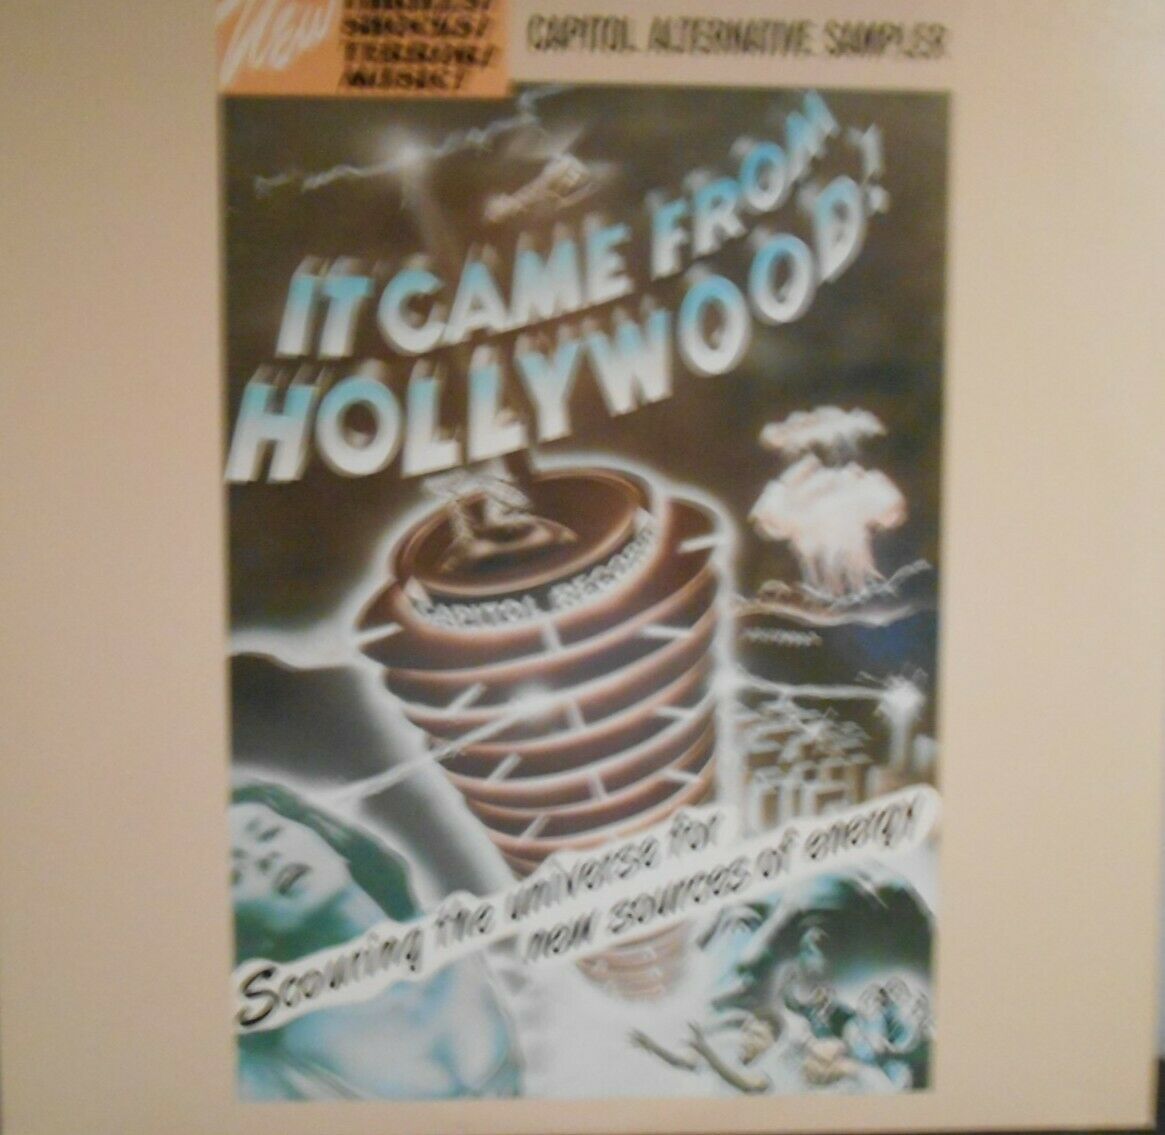 Primary image for IT CAME FROM HOLLYWOOD VINYL RECORD CAPITOL ALTERNATIVE SAMPLER EX.